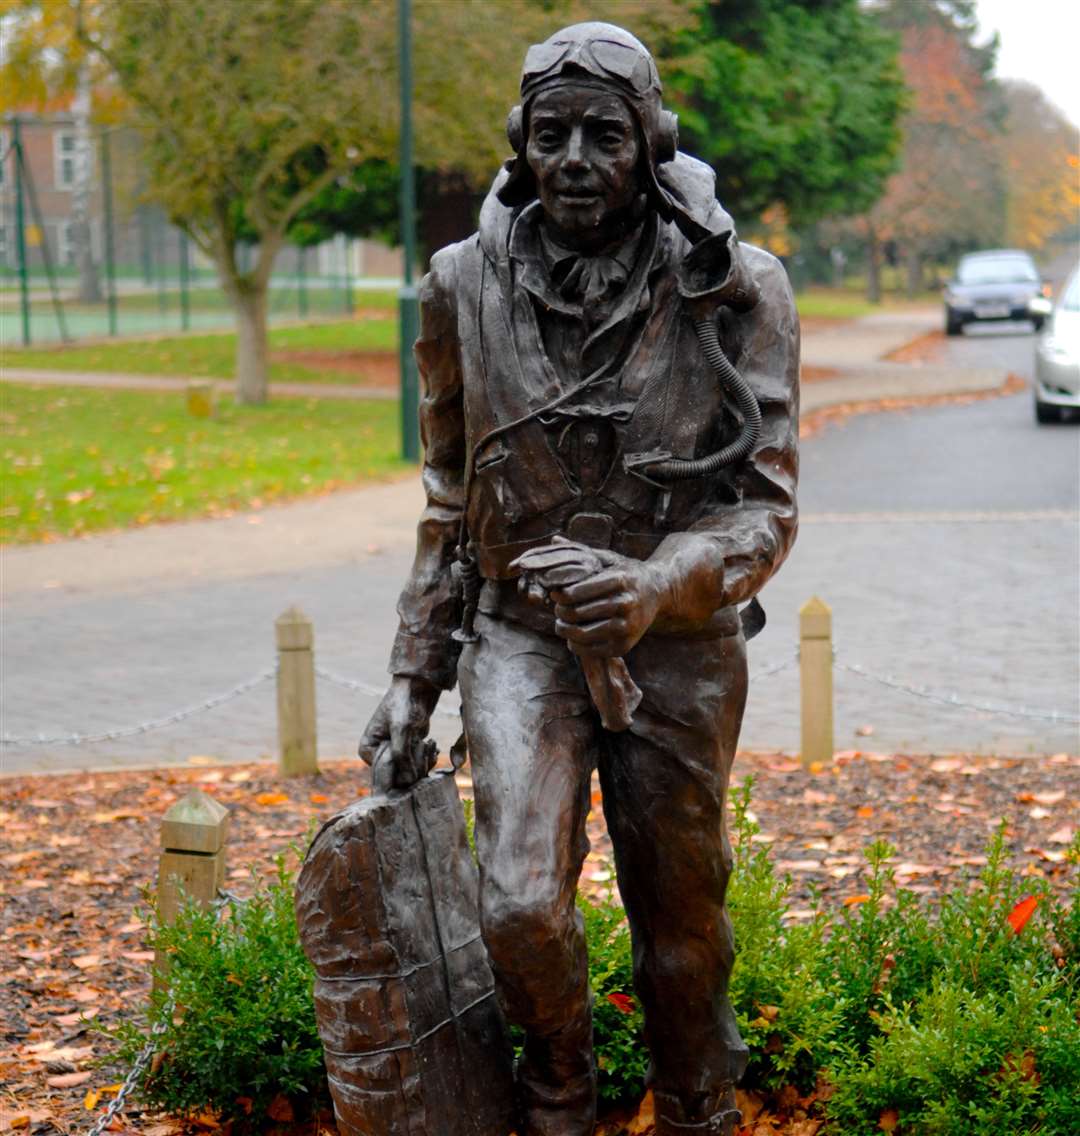 The bronze statue features a likeness of Group Captain Peter Townsend